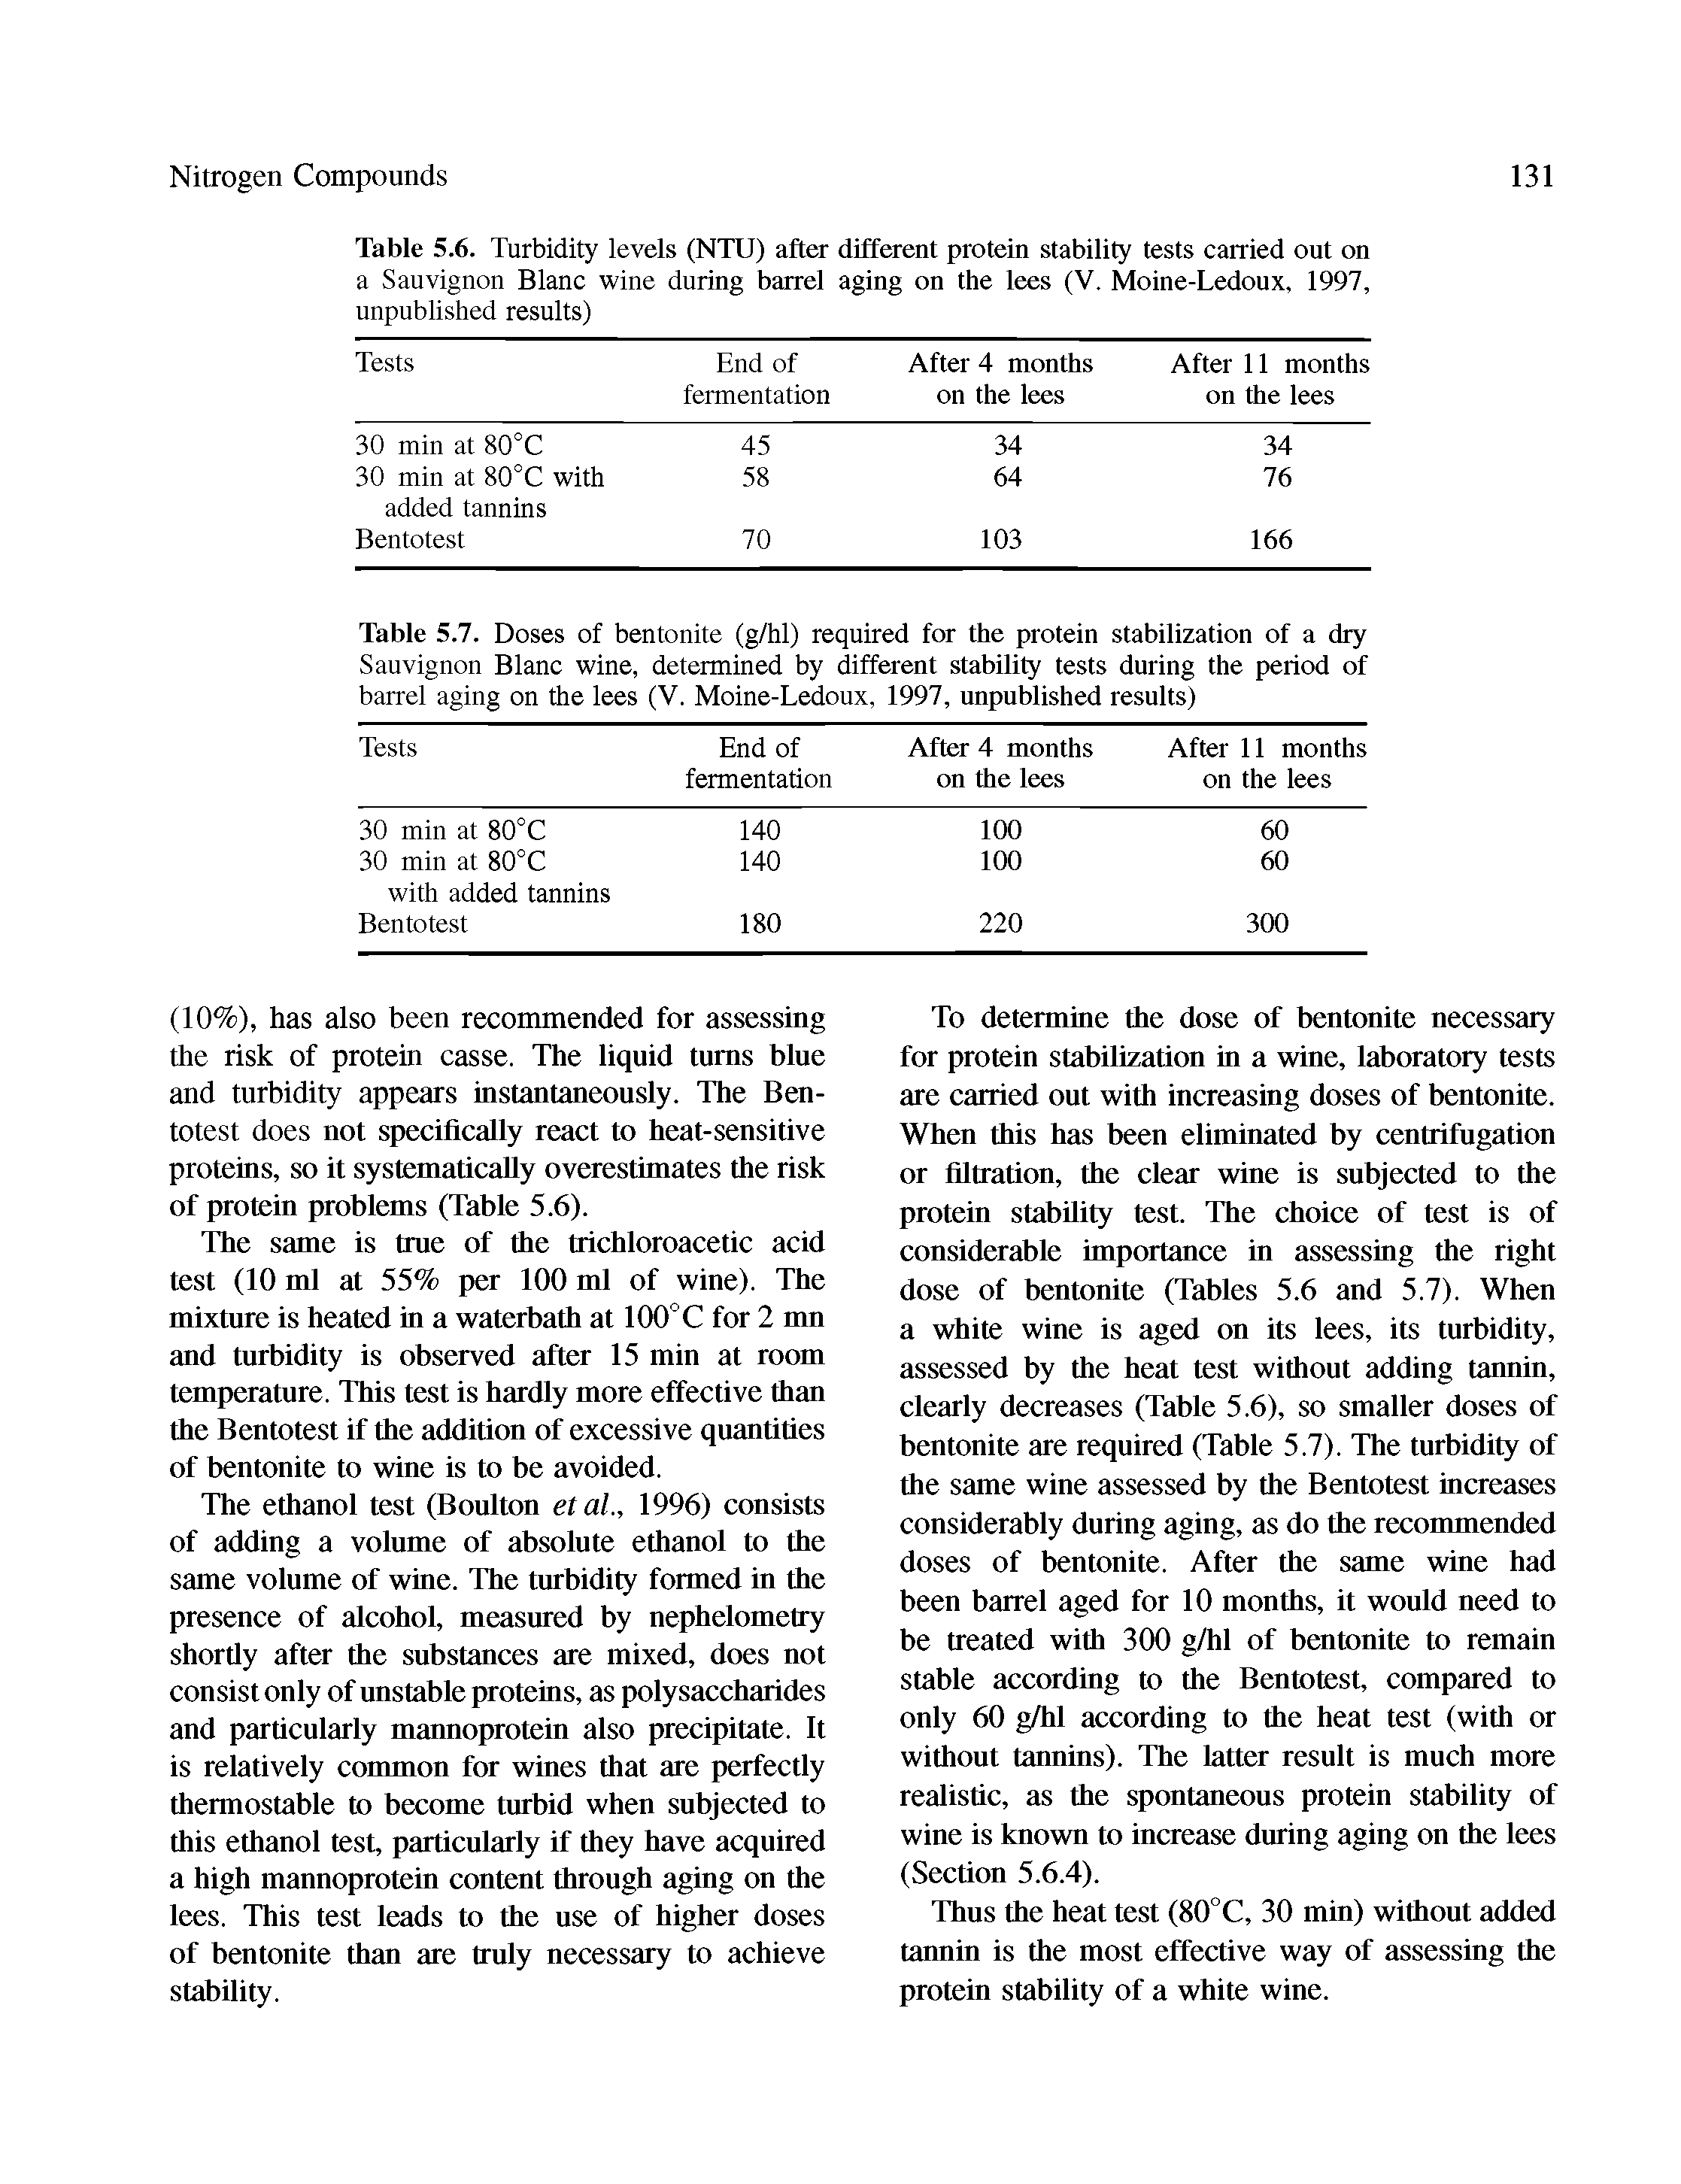 Table 5.6. Turbidity levels (NTU) after different protein stability tests carried ont on a Sauvignon Blanc wine during barrel aging on the lees (V. Moine-Ledoux, 1997, unpublished results)...